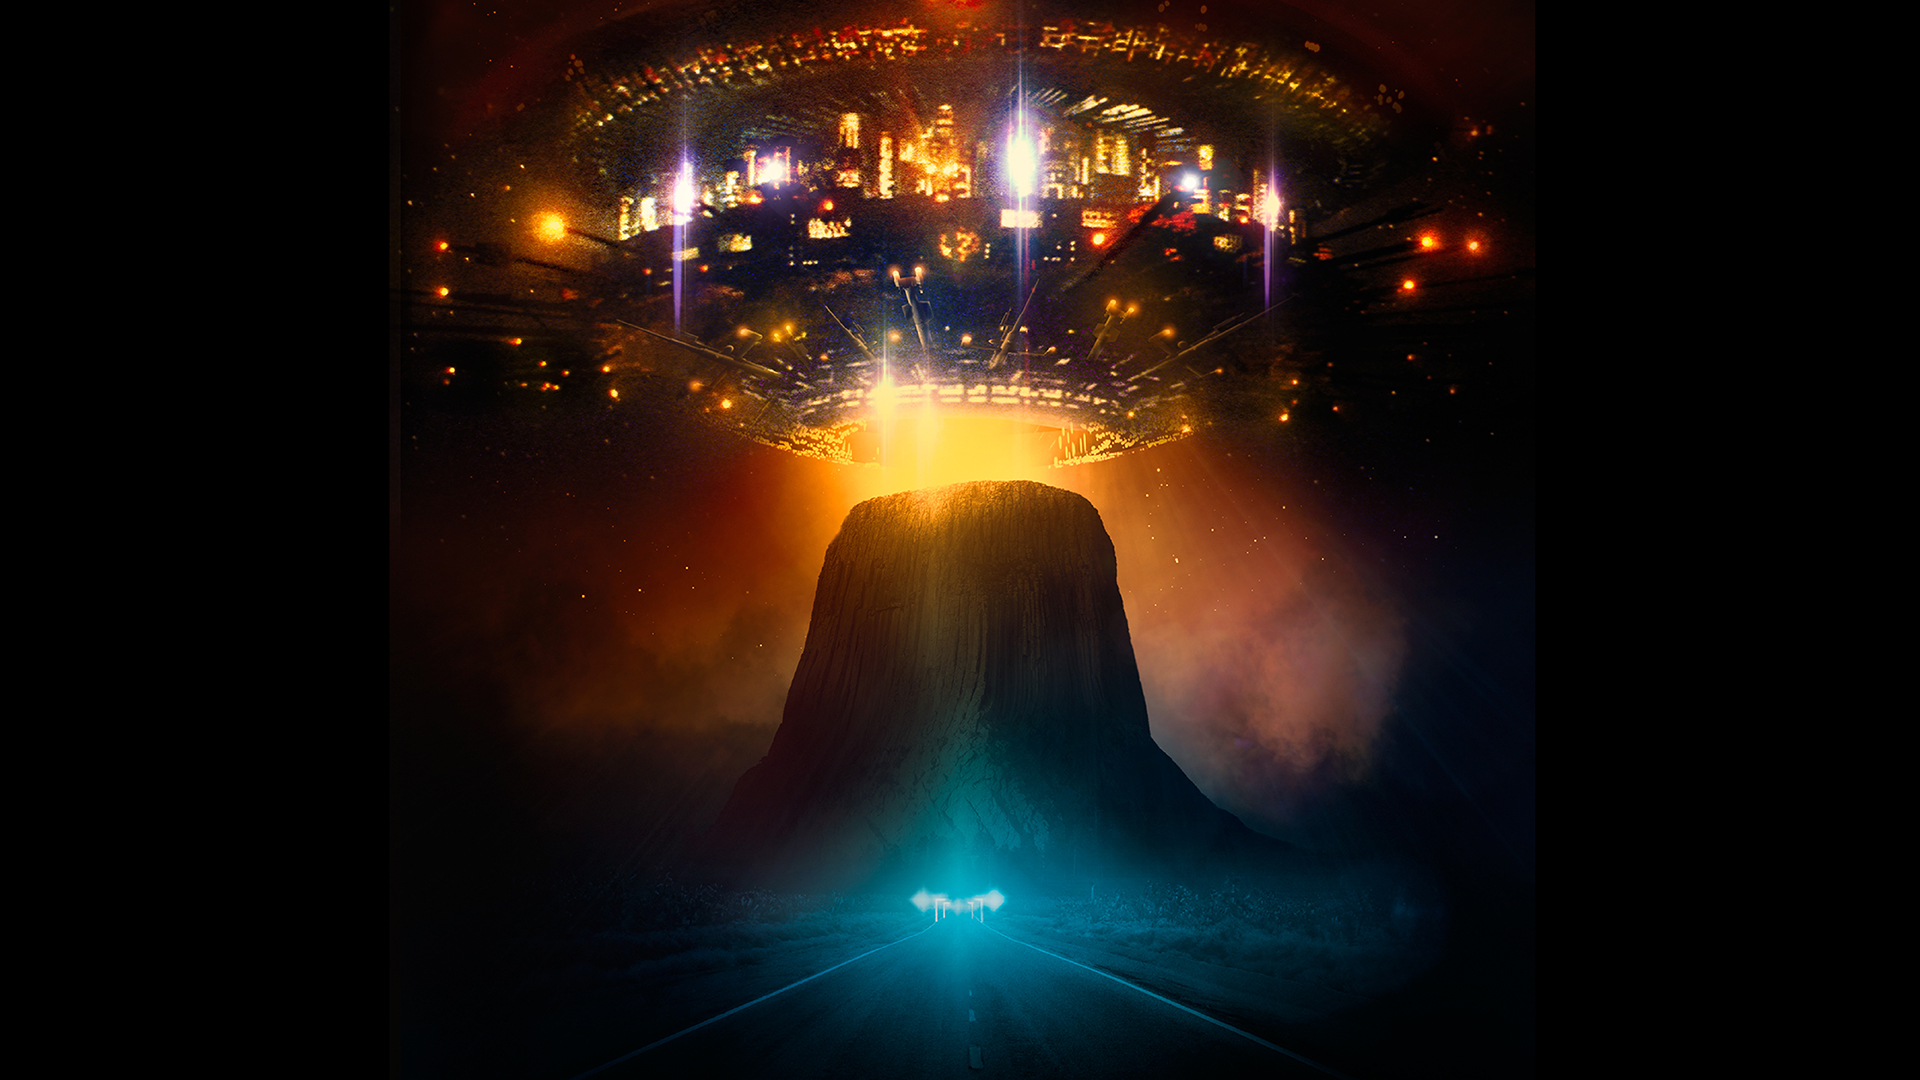 ‘Close Encounters of the Third Kind’ Is Returning to Theaters, But There’s a Catch